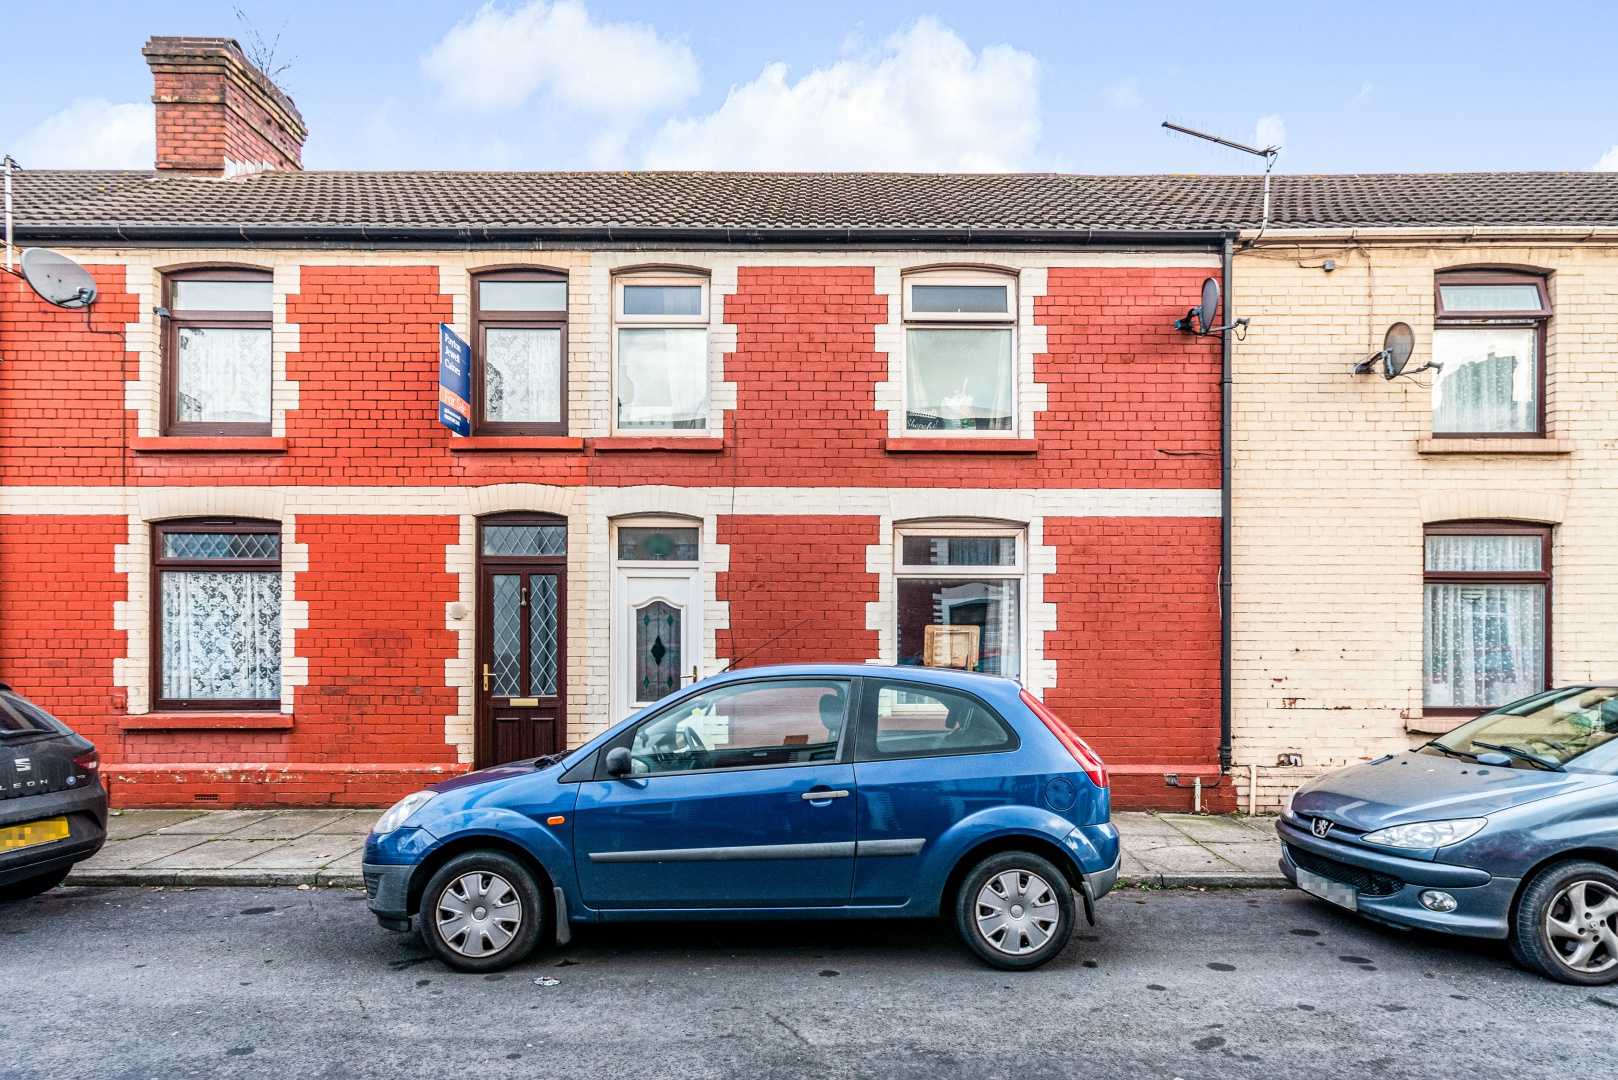 House in Taibach, Neath Port Talbot 11391796